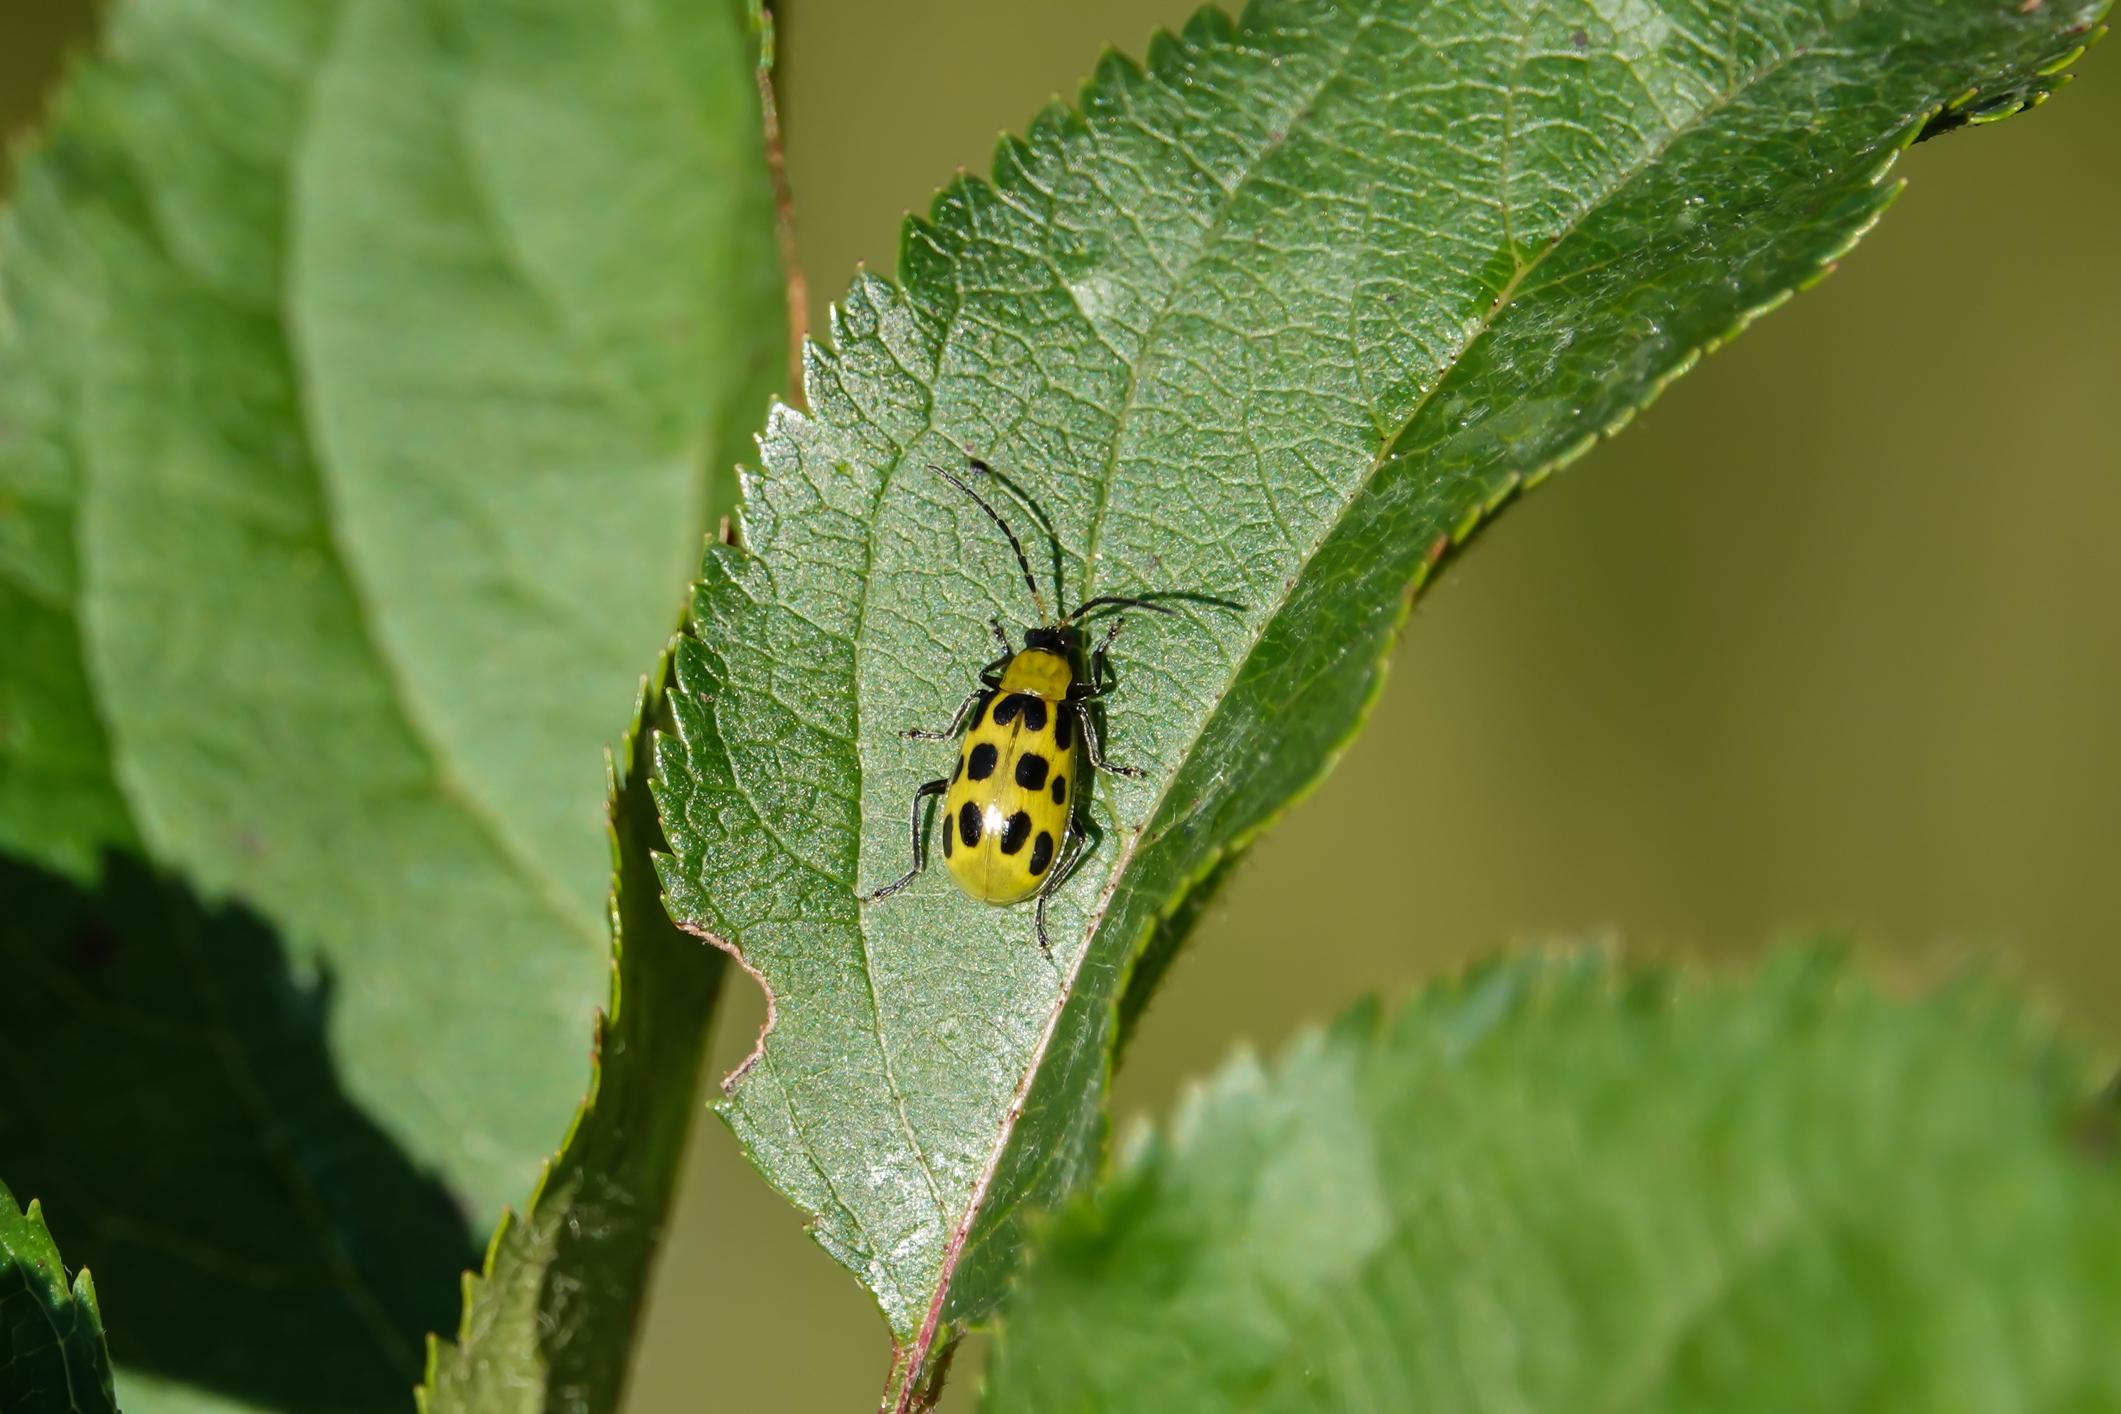 A yellow cucumber beetle with black spots on a leaf